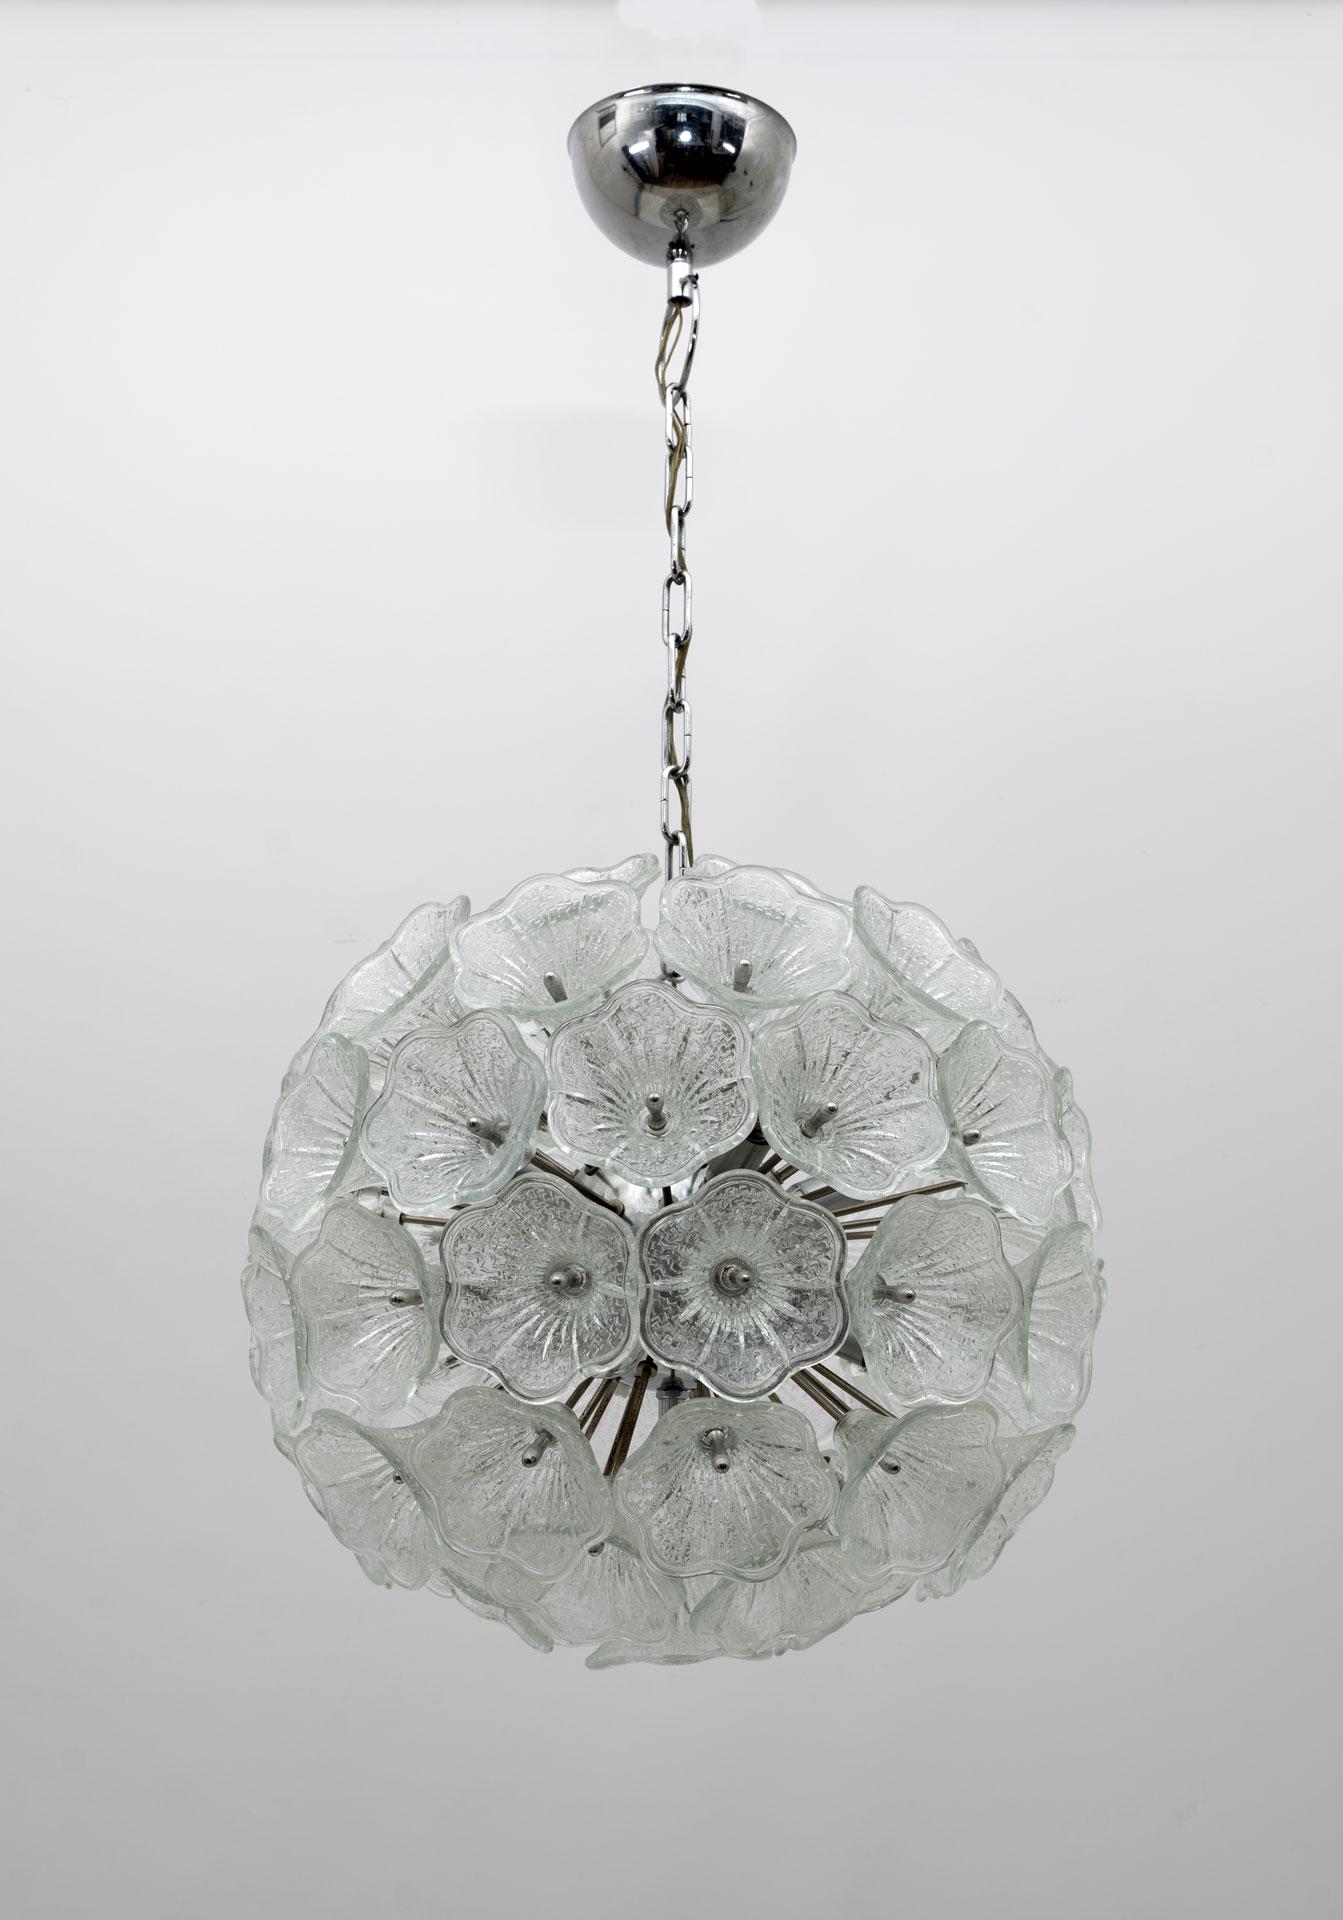 Murano glass Sputnik Flower chandelier Venini Style, Italy. Covered in patterned glass flowers with chromed metal frame. A beautiful natural and clear look become a jewel in your living room. In good original condition. Incredible eye-catching piece